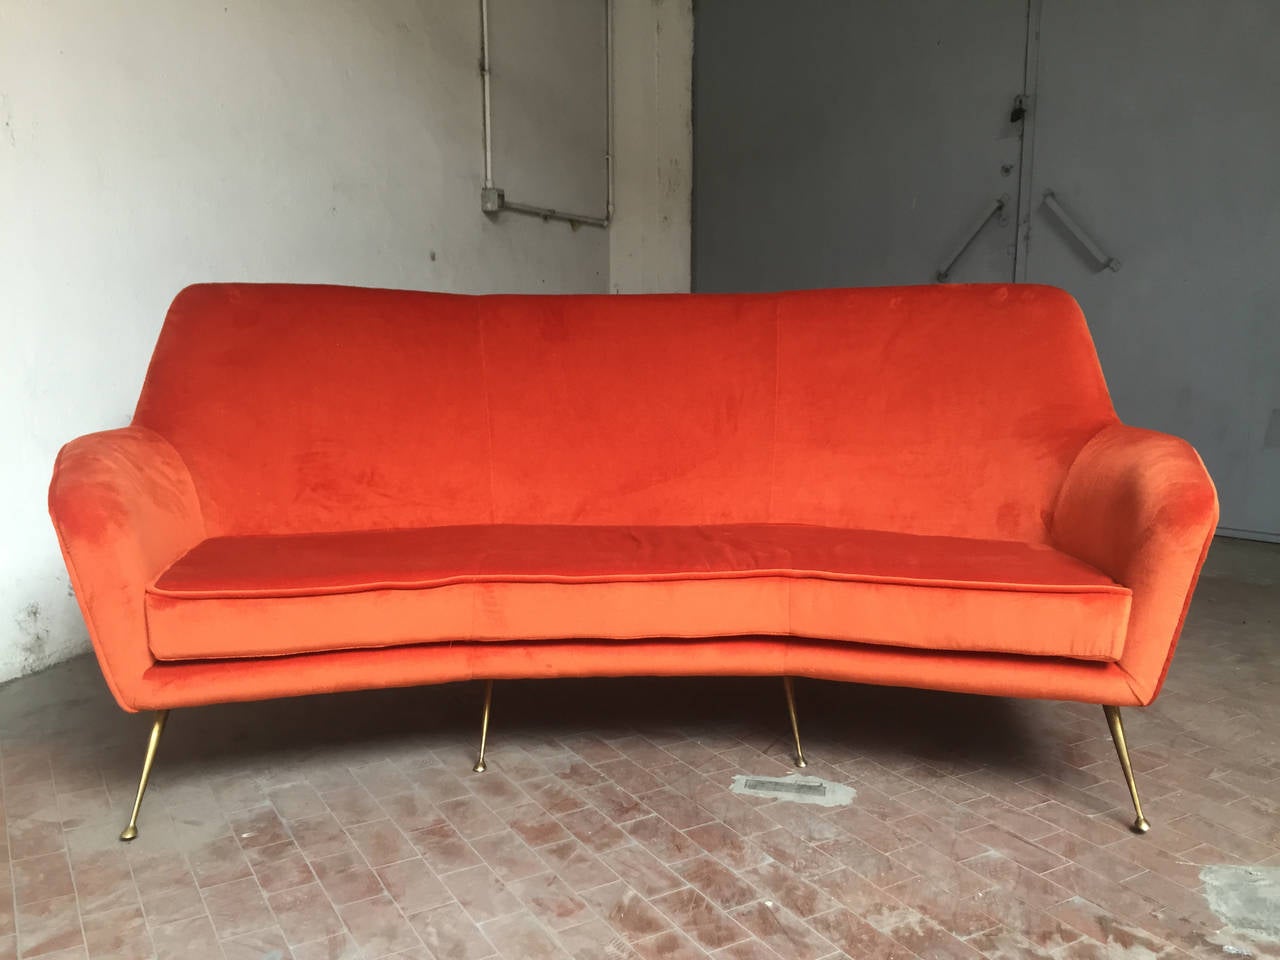 Curved sofa Italian design, 1950.
Manufacturing Minotti lounges, velvet fabric brick red, in perfect condition, restored.